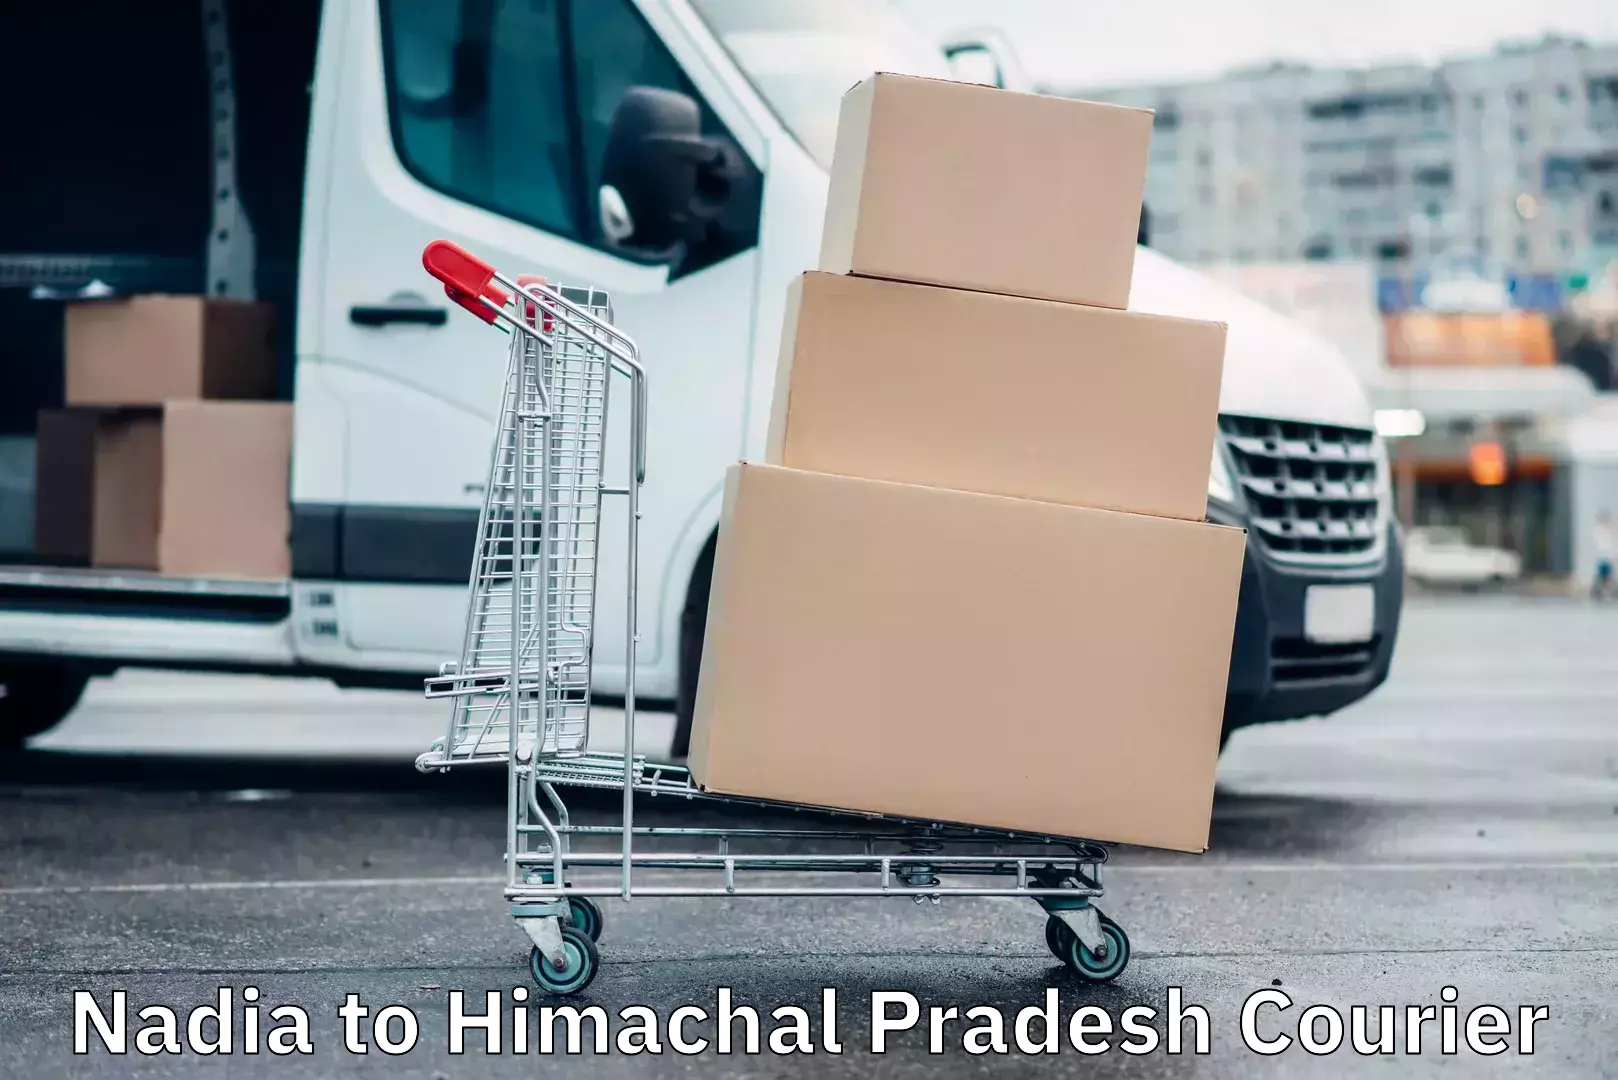 Multi-national courier services Nadia to Himachal Pradesh